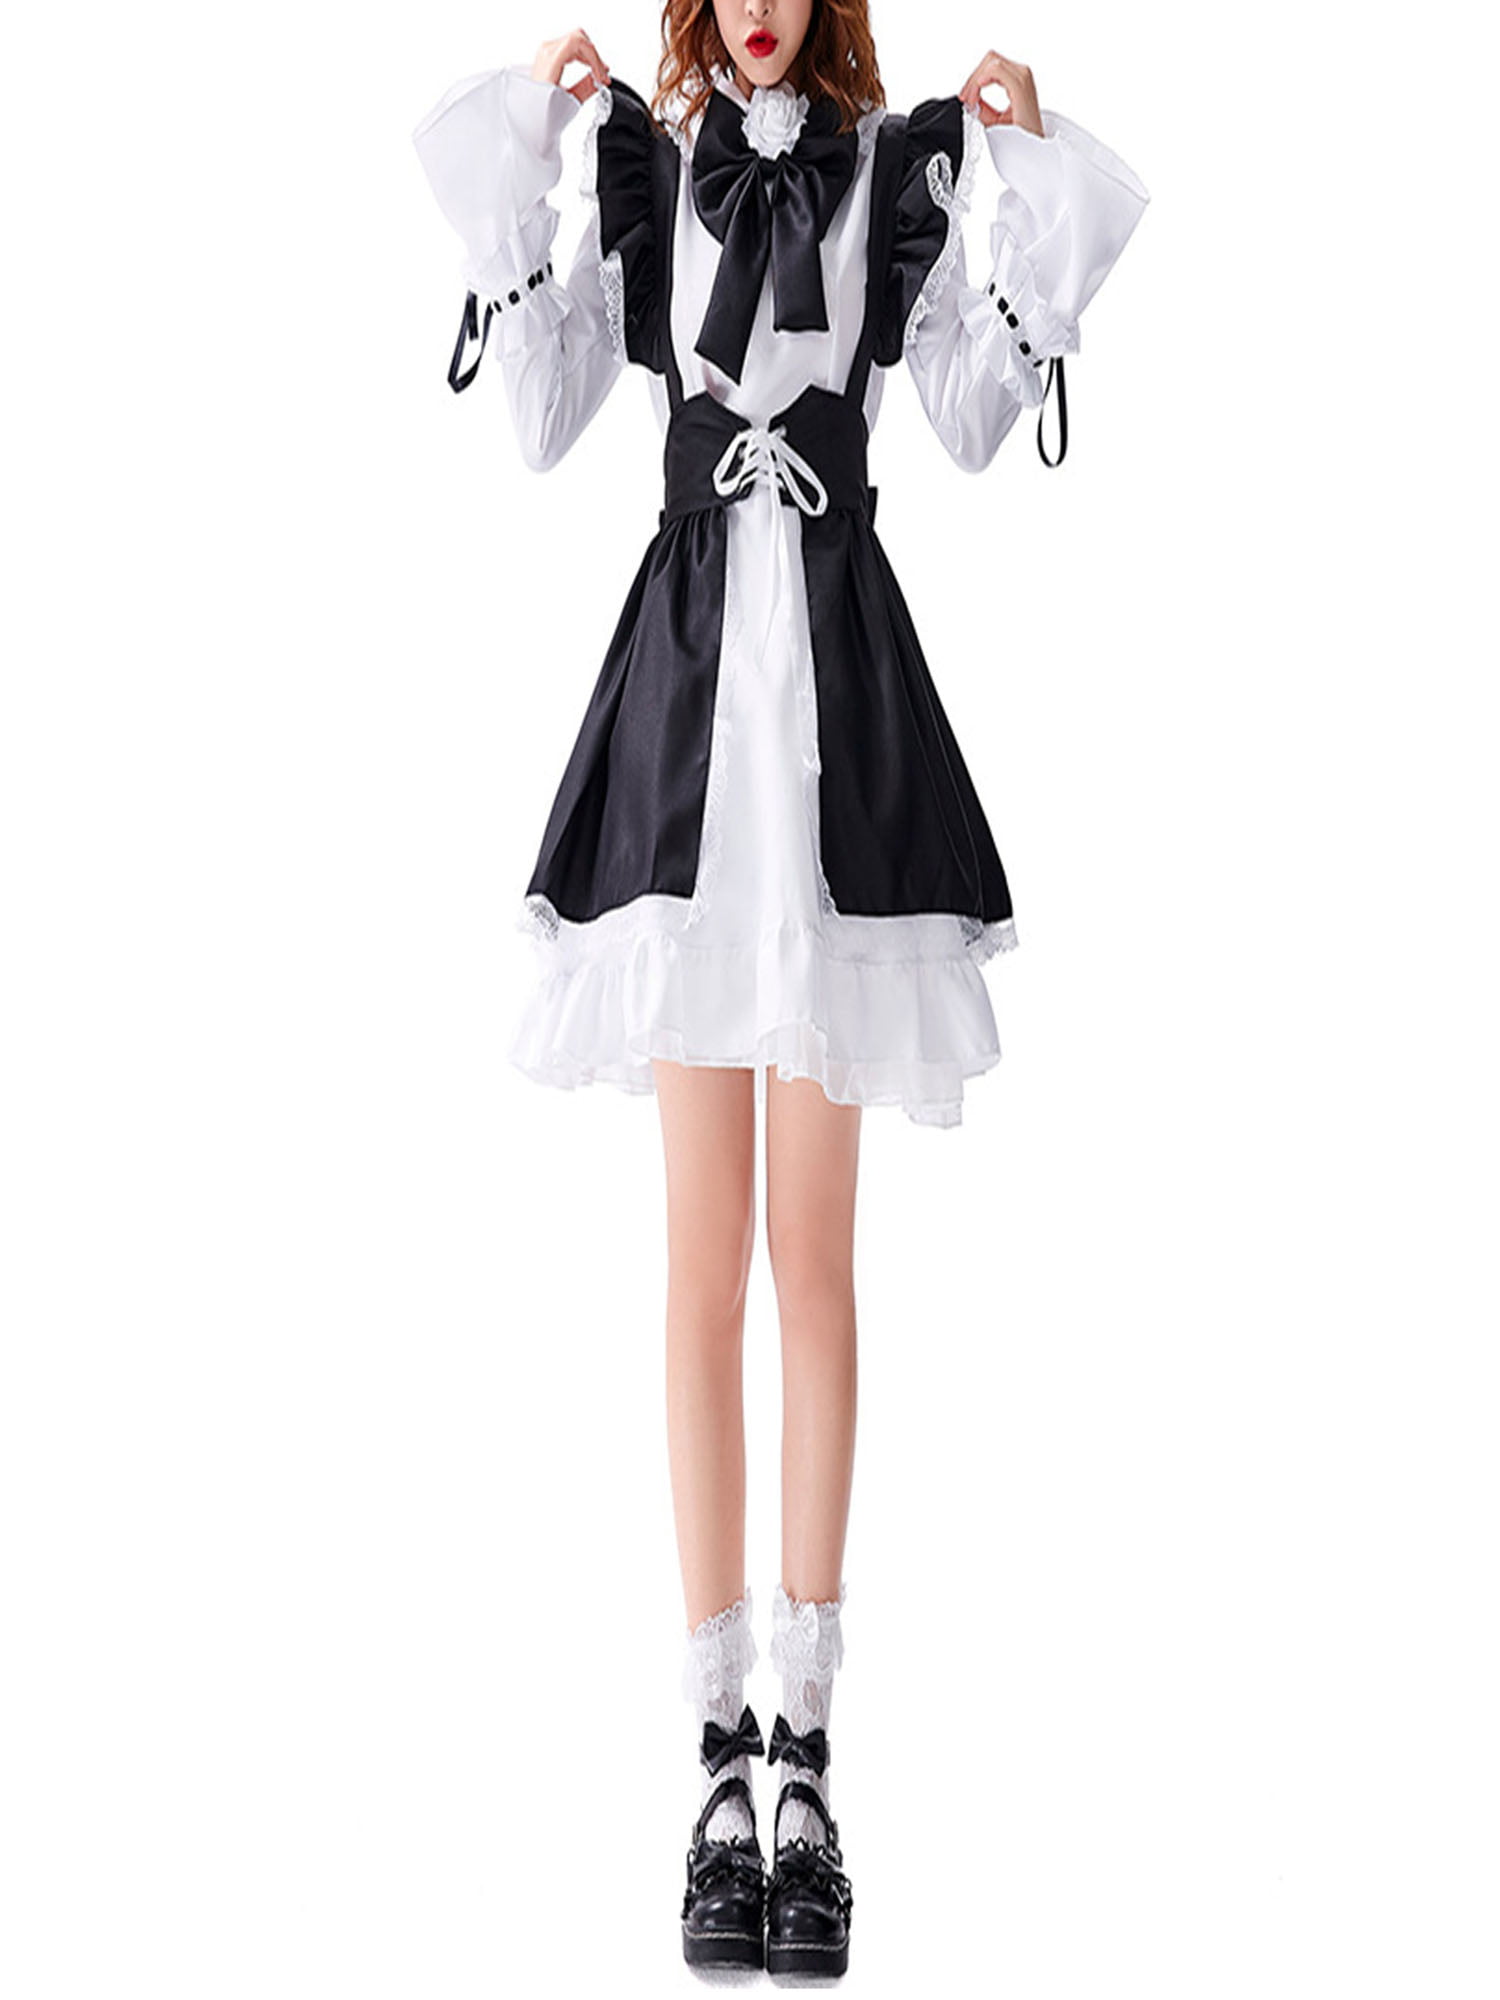 Women Doctor Nurse Uniform Maid Cosplay Costume Roleplay Party Fancy Outfits Set 